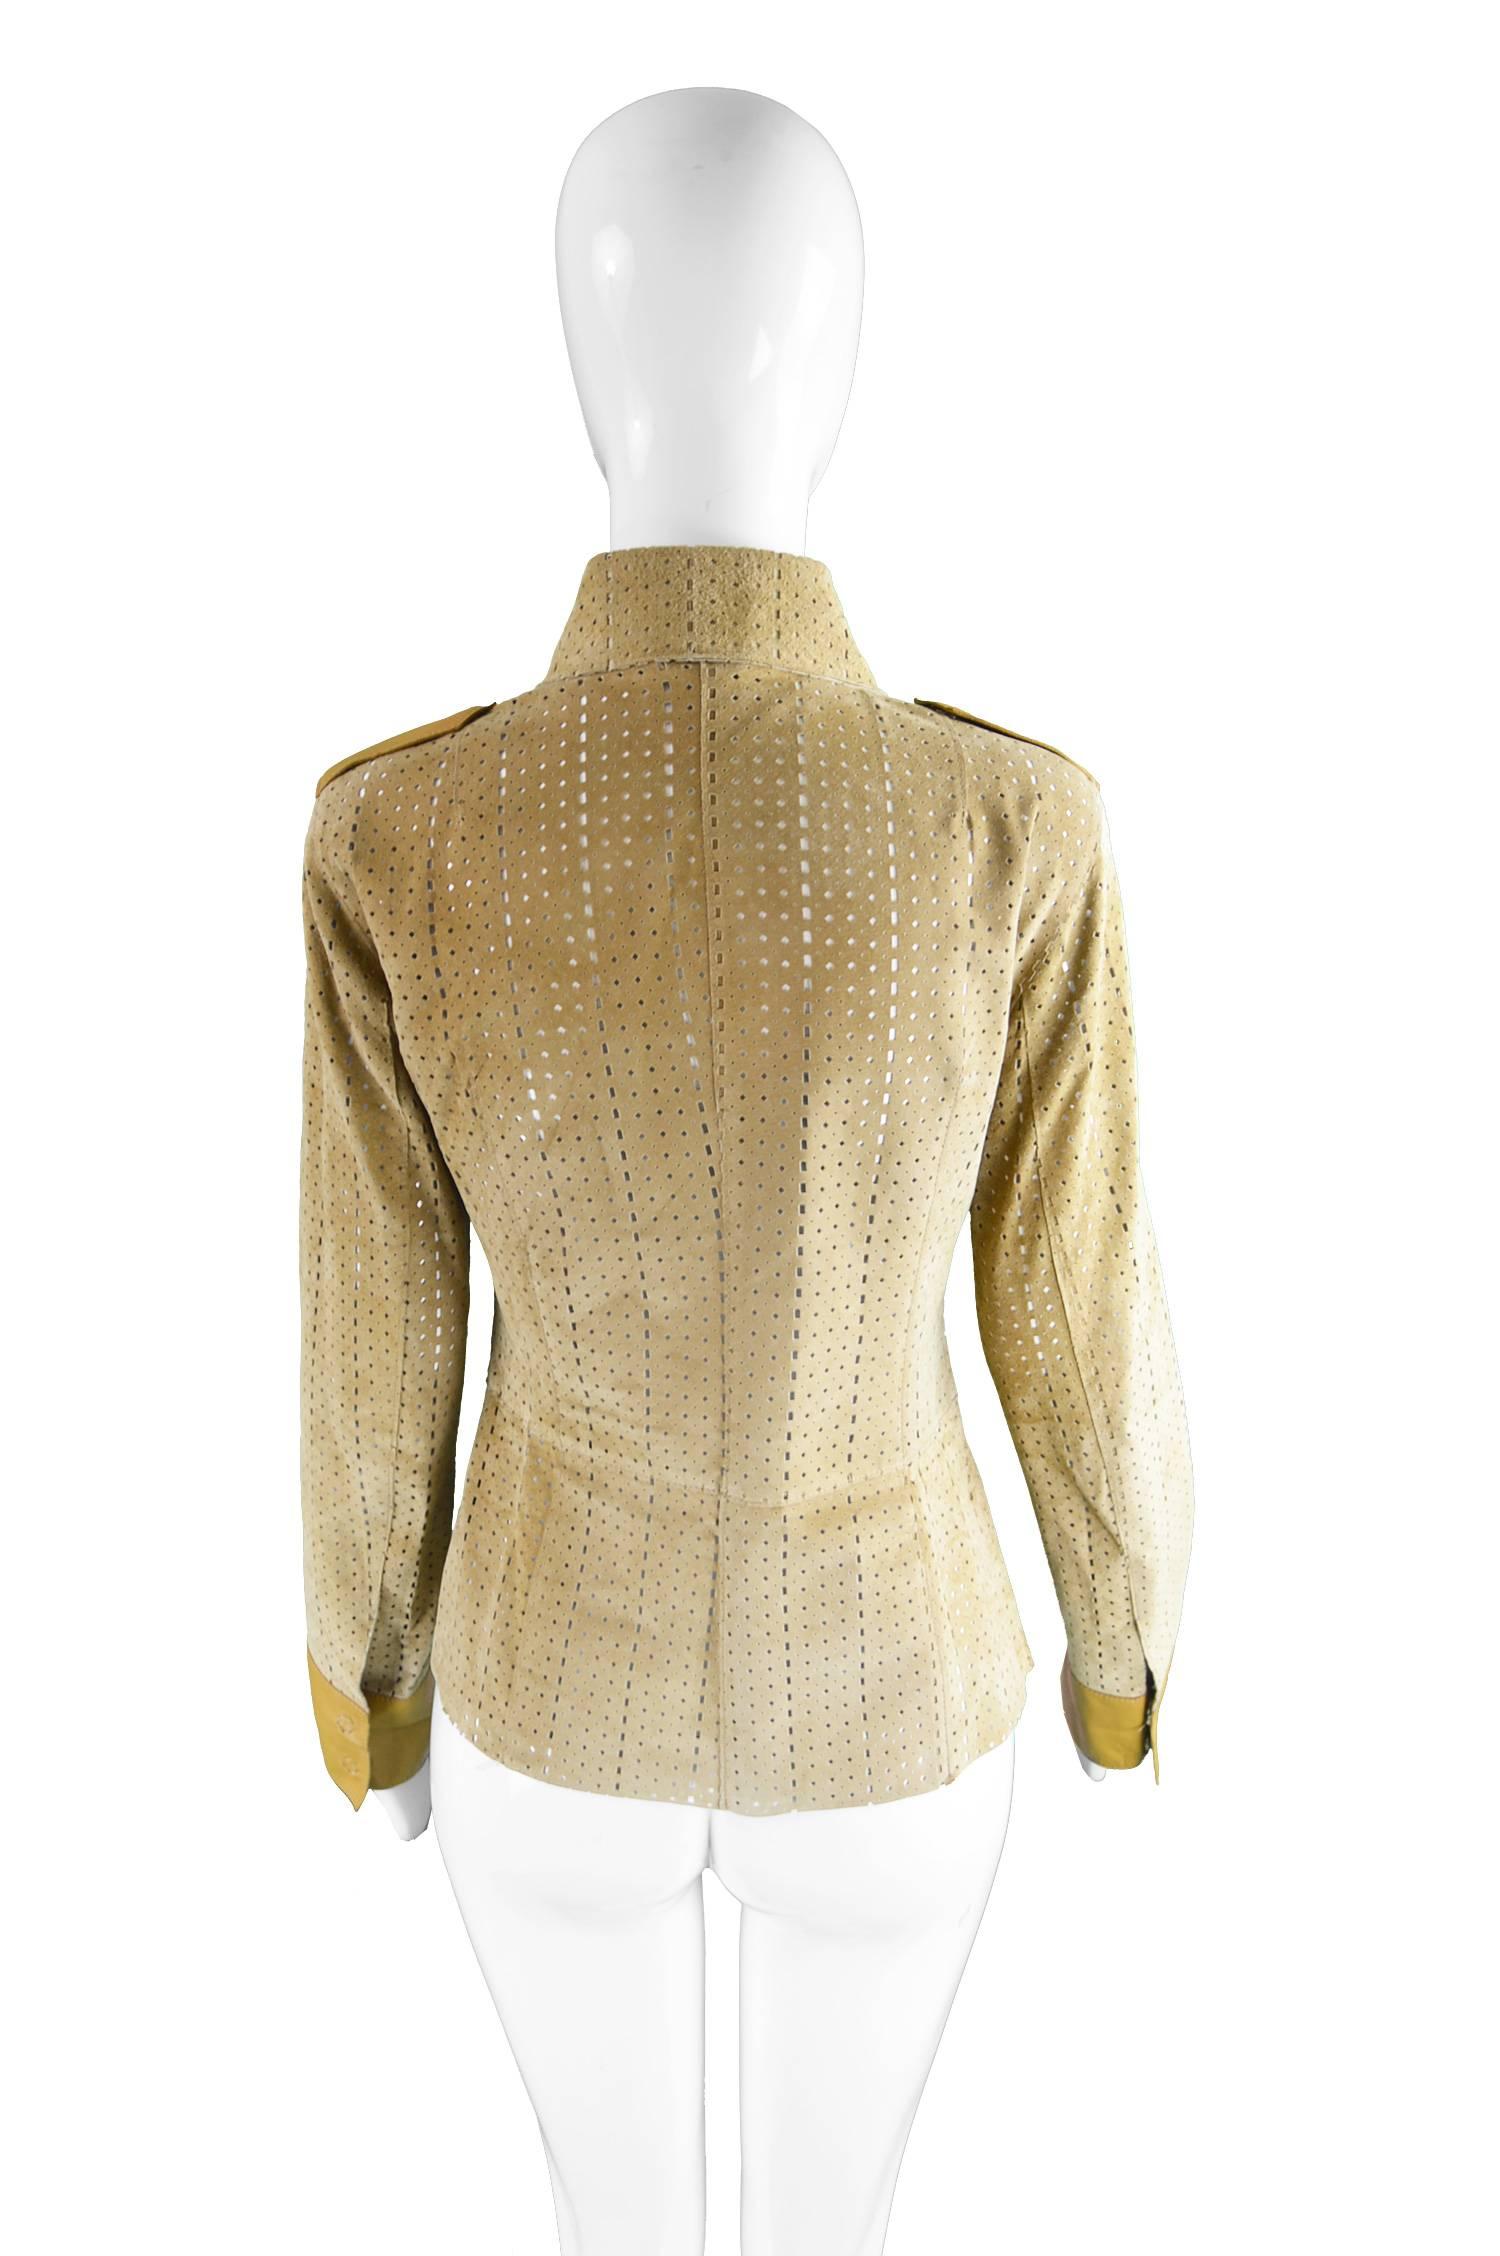 Dolce & Gabbana Vintage Brown Cutwork Suede and Leather Shirt, 1990s For Sale 5